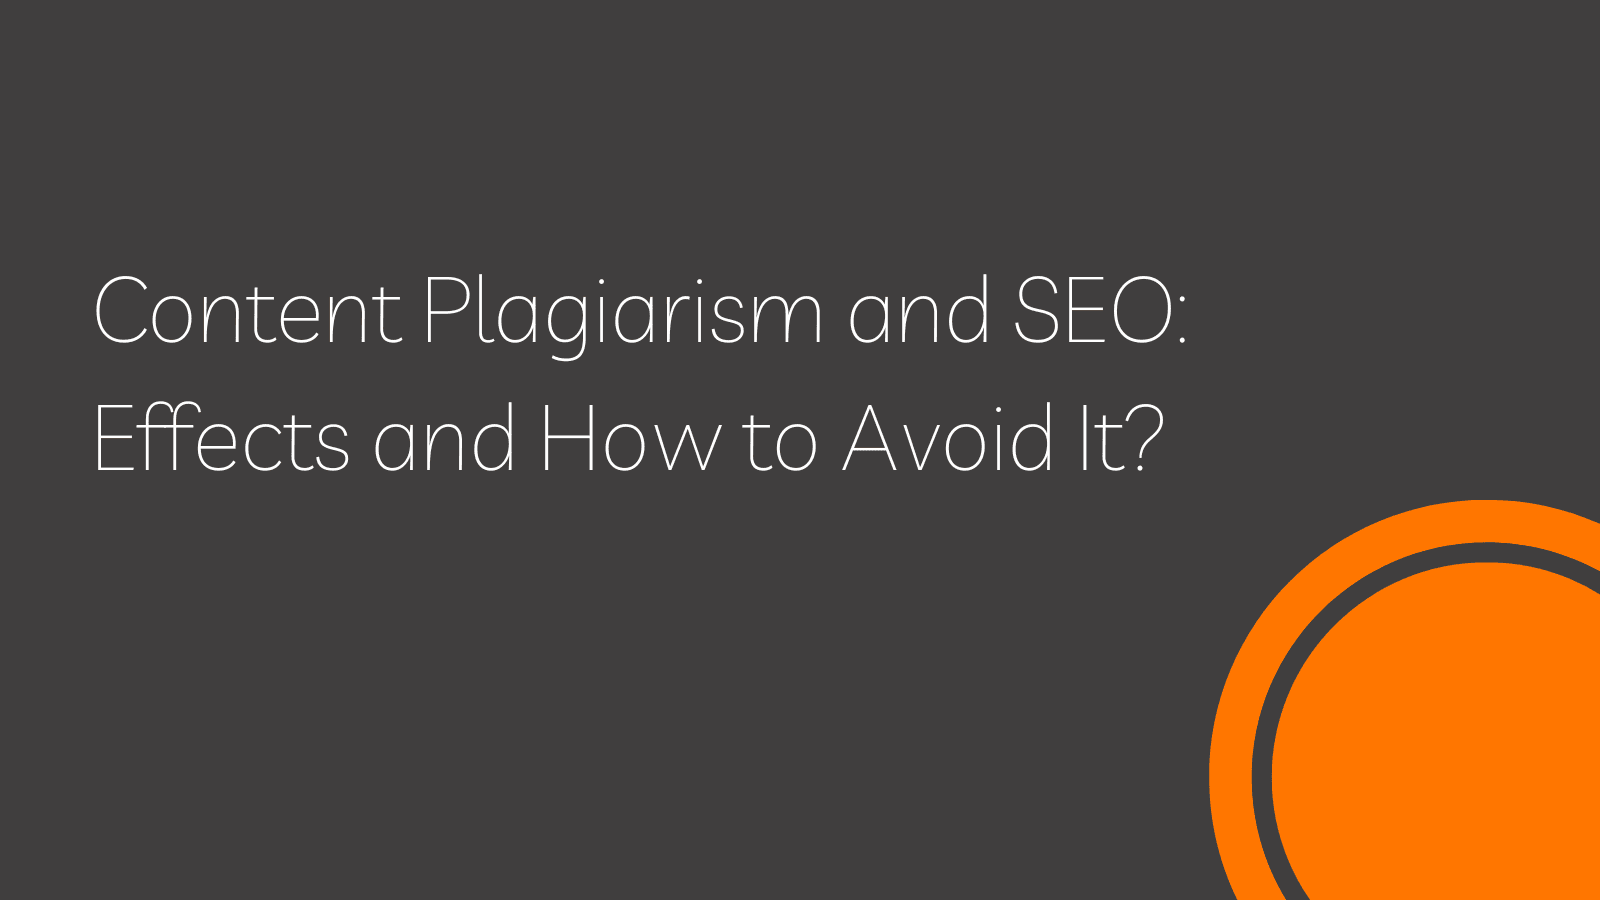 Content Plagiarism and SEO: Effects and How to Avoid It?